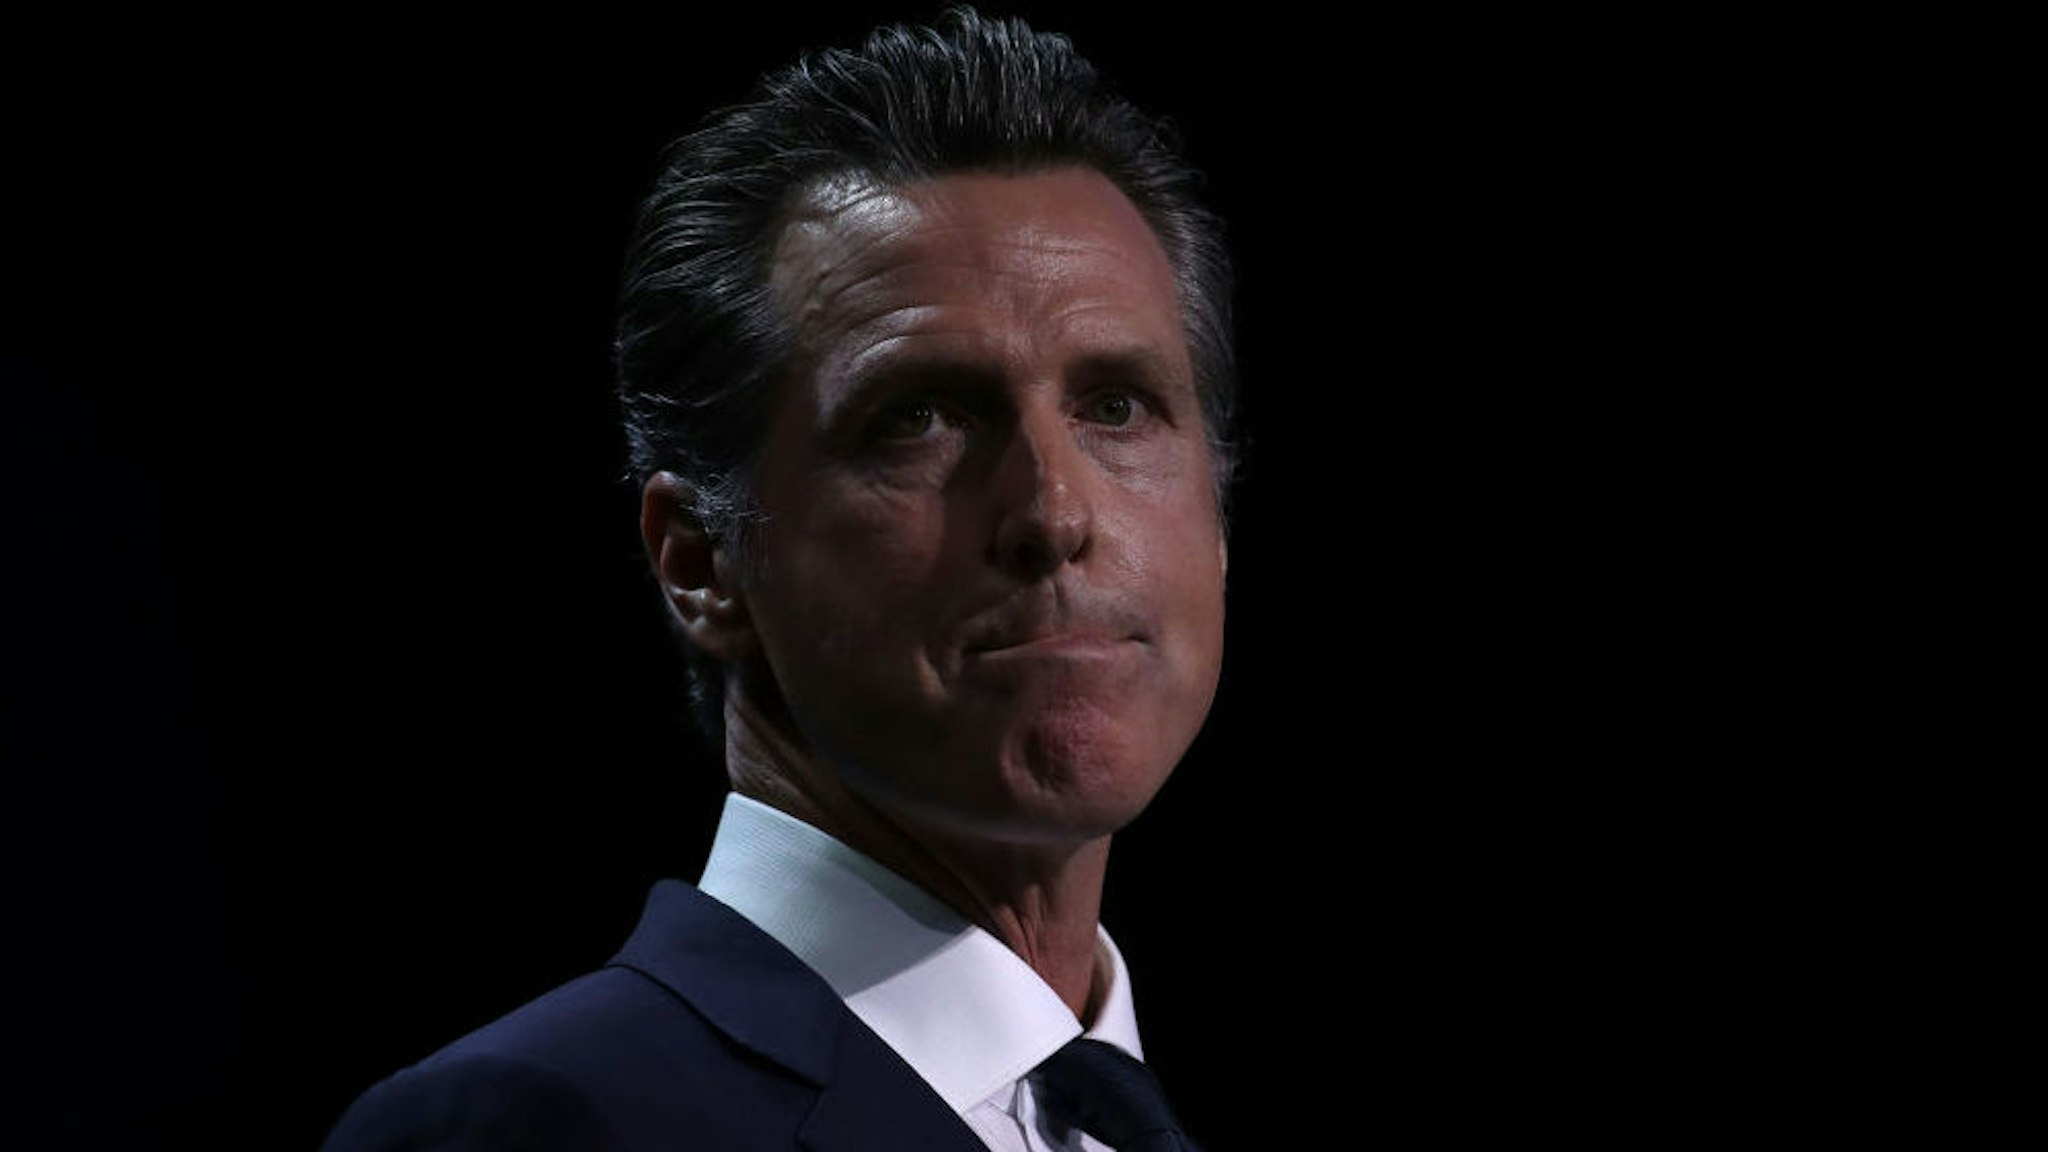 SAN FRANCISCO, CALIFORNIA - JUNE 01: California Gov. Gavin Newsom speaks during the California Democrats 2019 State Convention at the Moscone Center on June 01, 2019 in San Francisco, California. Several Democratic presidential hopefuls are speaking at the California Democratic Convention that runs through Sunday.